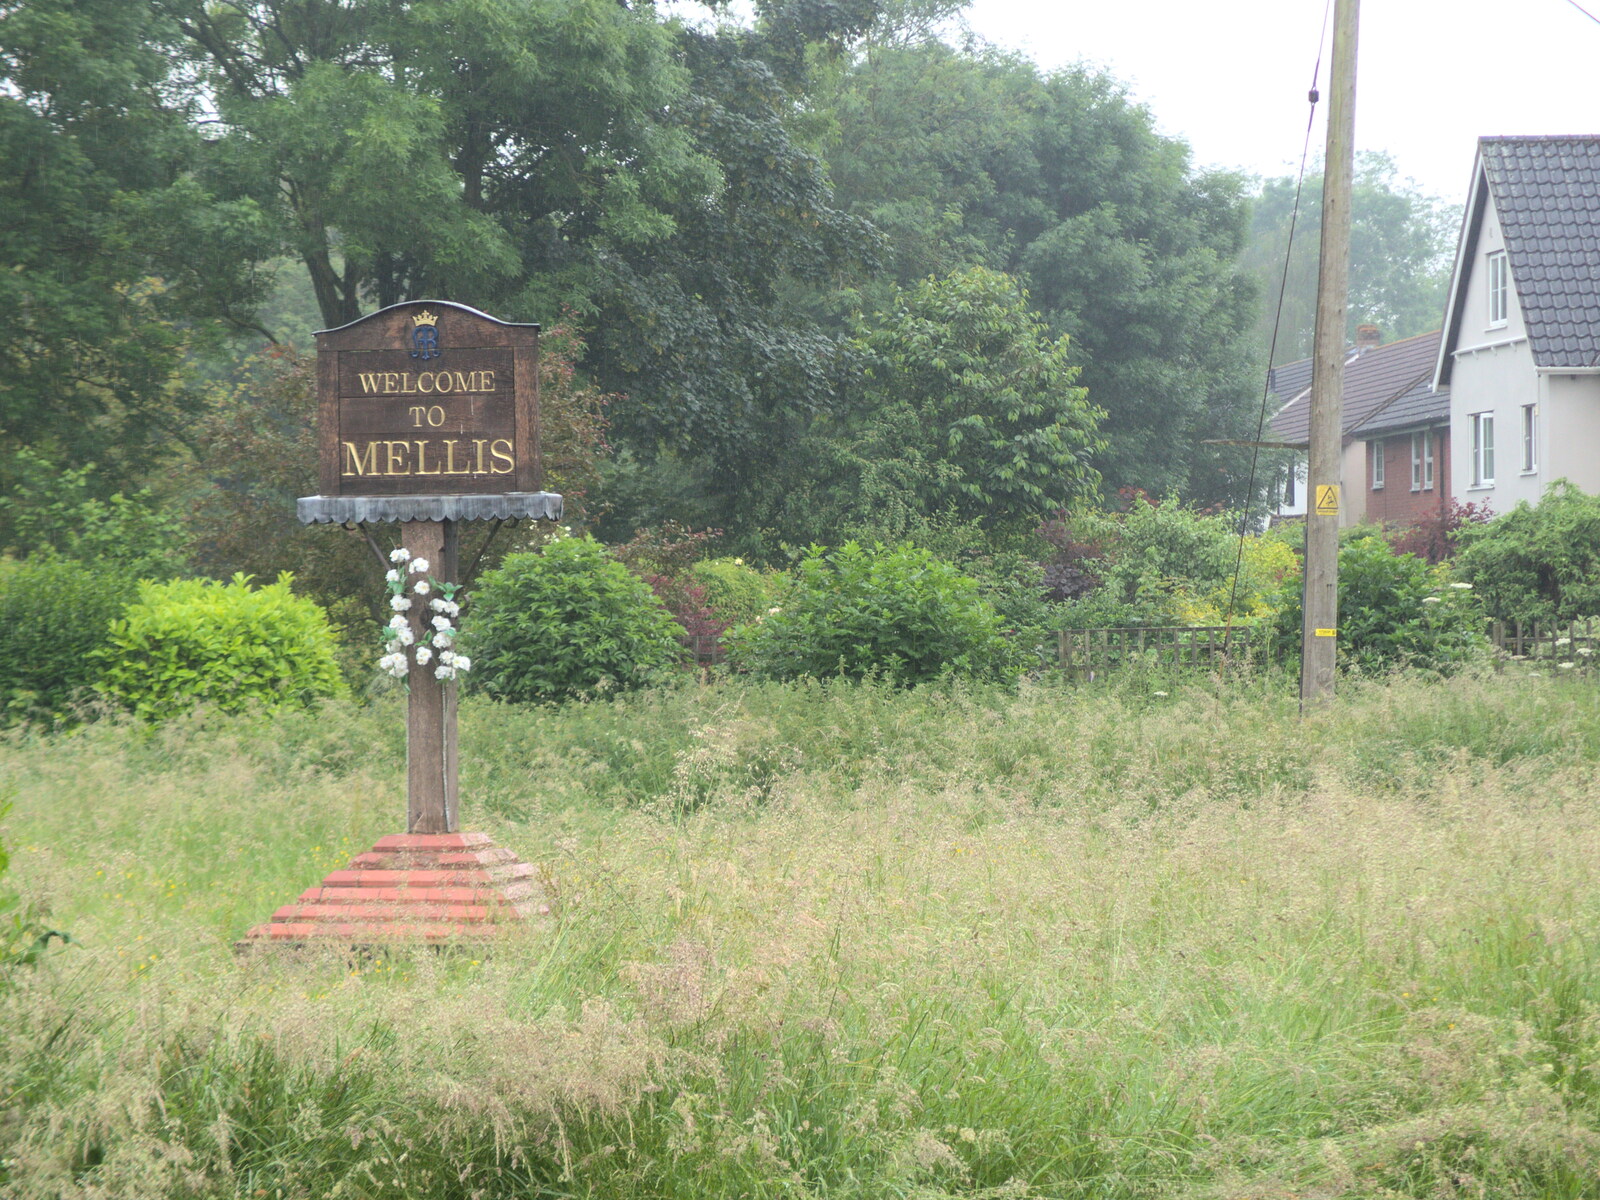 The Mellis sign in the rain from A BSCC Ride to Pulham Market, Norfolk - 17th June 2021